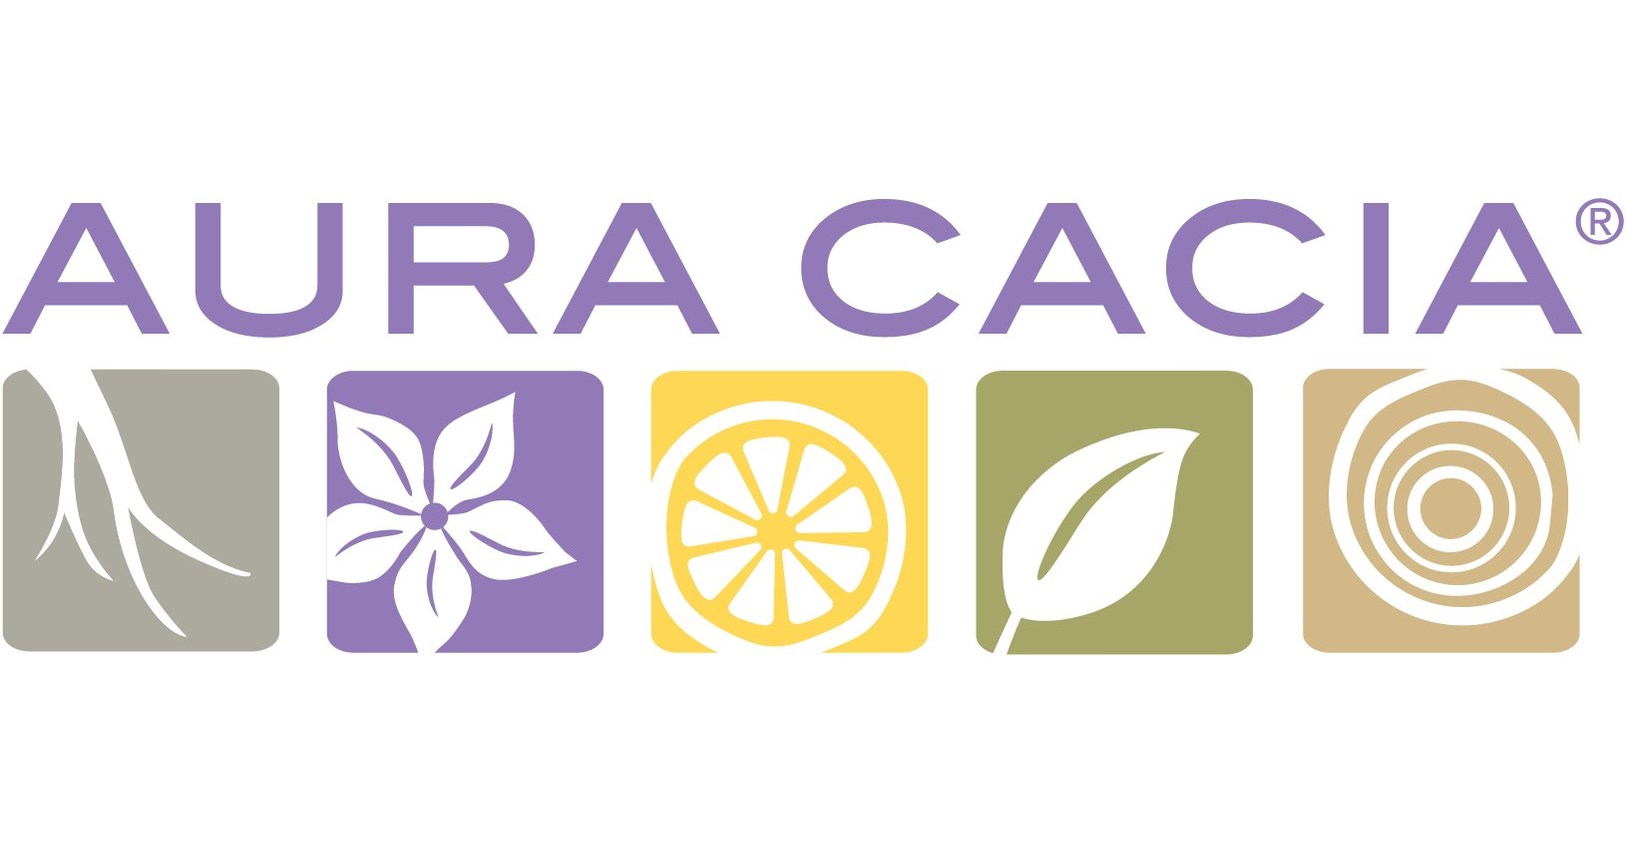 Aura Cacia Elevates Bath Experiences for Kids and Adults with New Aromatherapy Kits and Bubble Bath